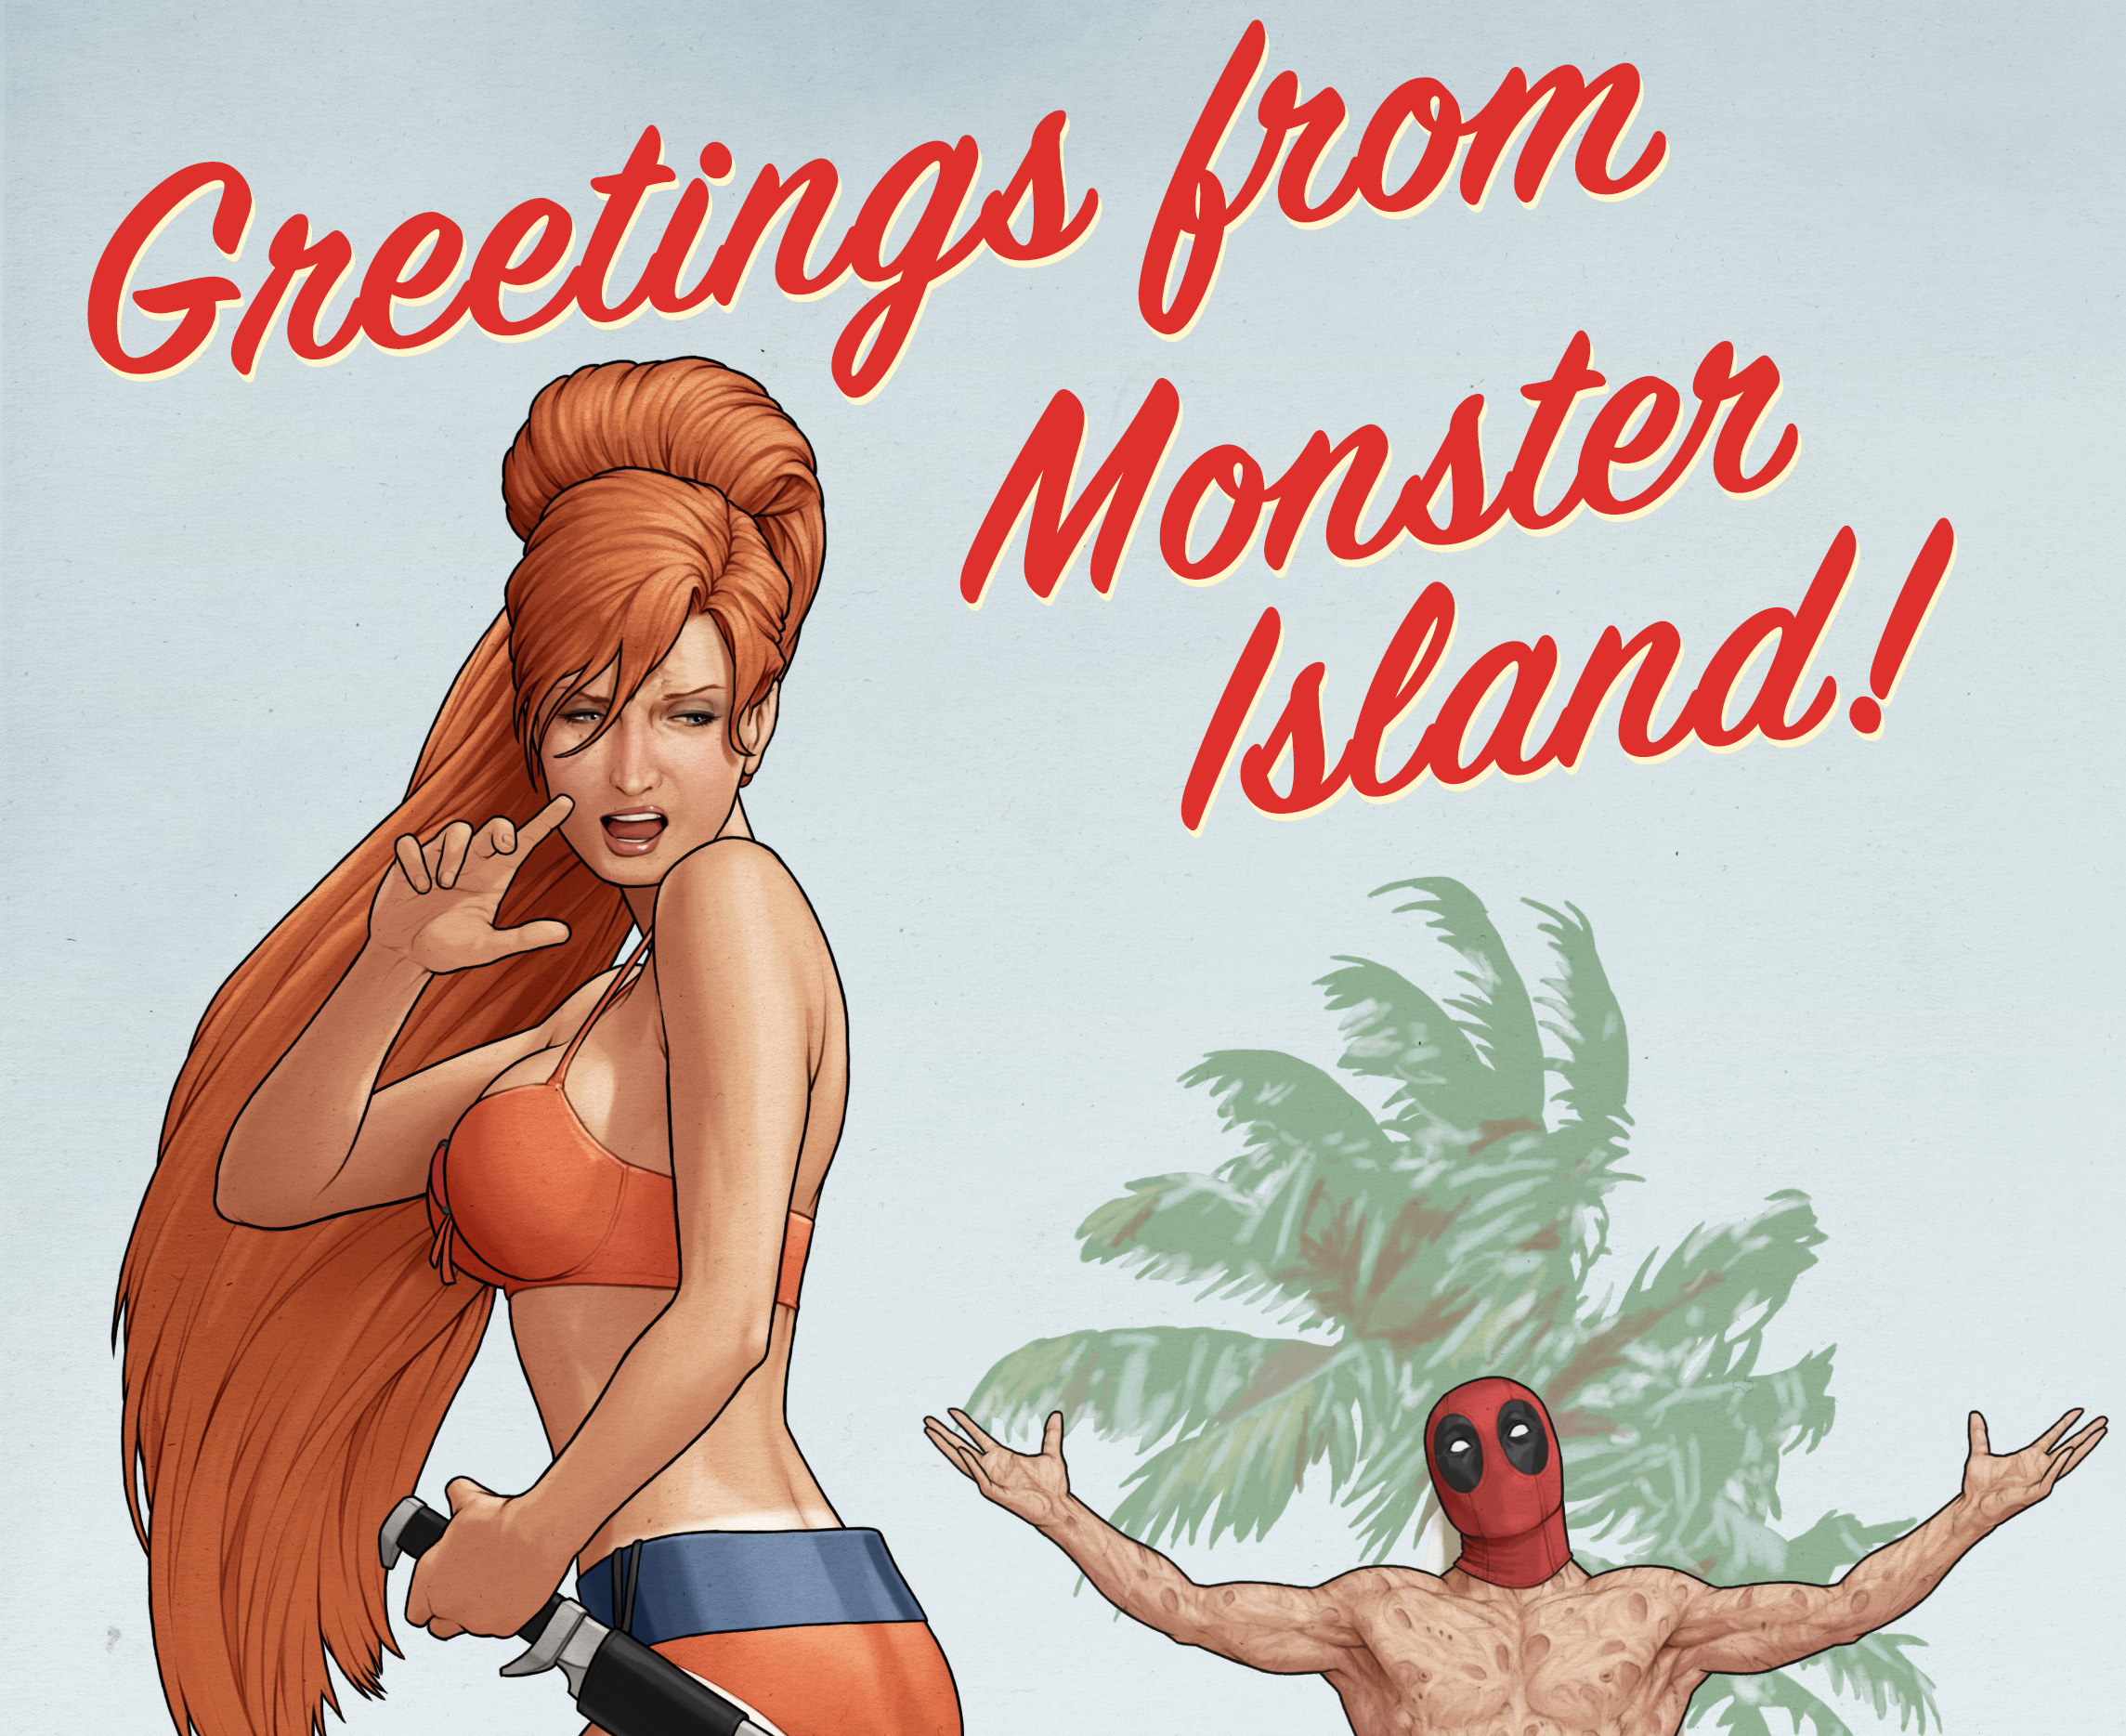 First Look: Jeff the baby landshark and Elsa Bloodstone reenact Coppertone ad in new teaser